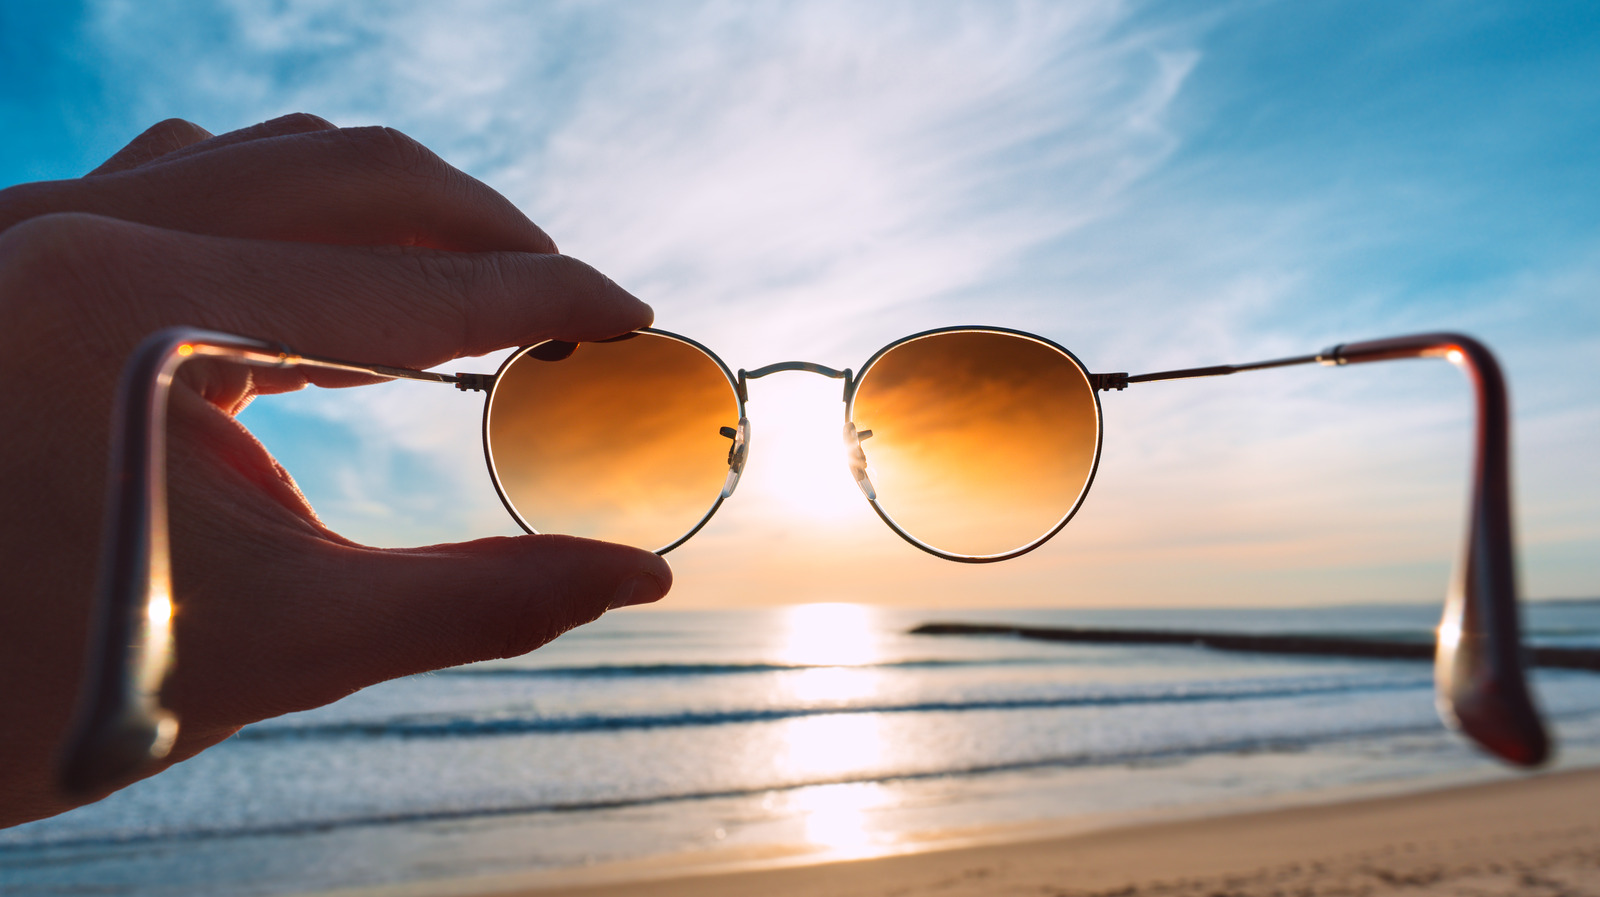 The Top 5 Best Sunglasses For UV Protection